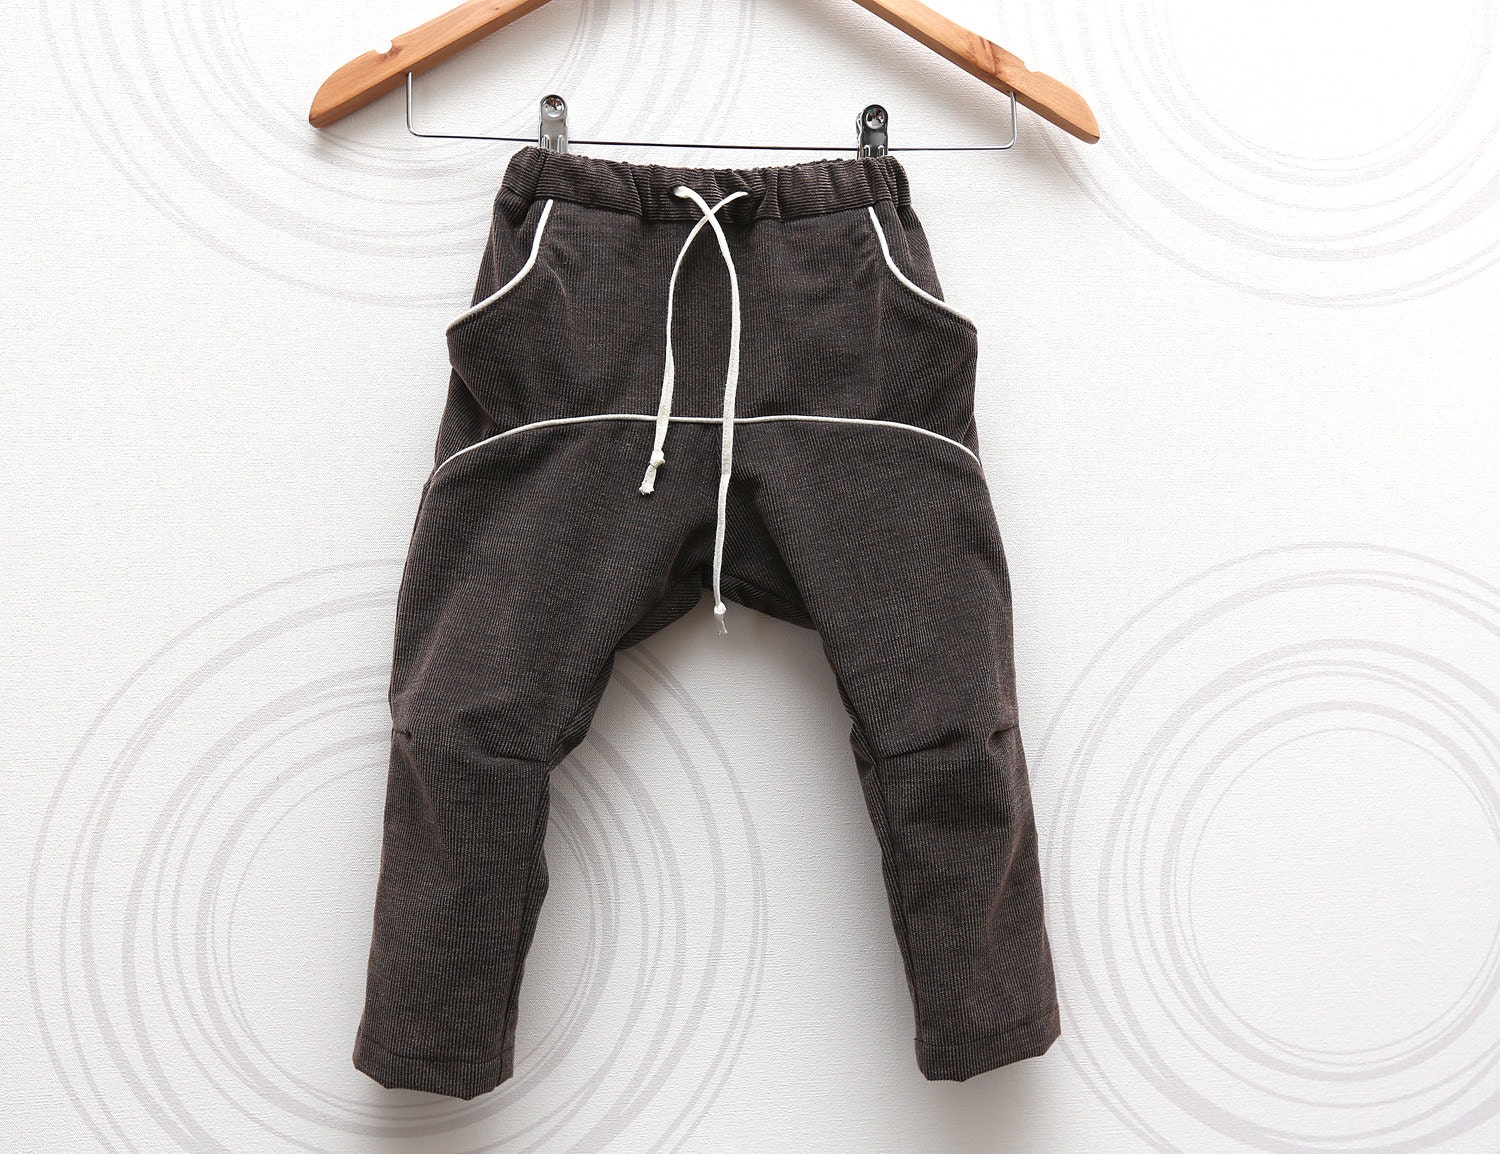 Toddler boys corduroy pants in brown Adjustable waist Comfortable slouchy low crotch trousers with tighter legs  // size US 1-3 (EU 80-98) - ZanziBach